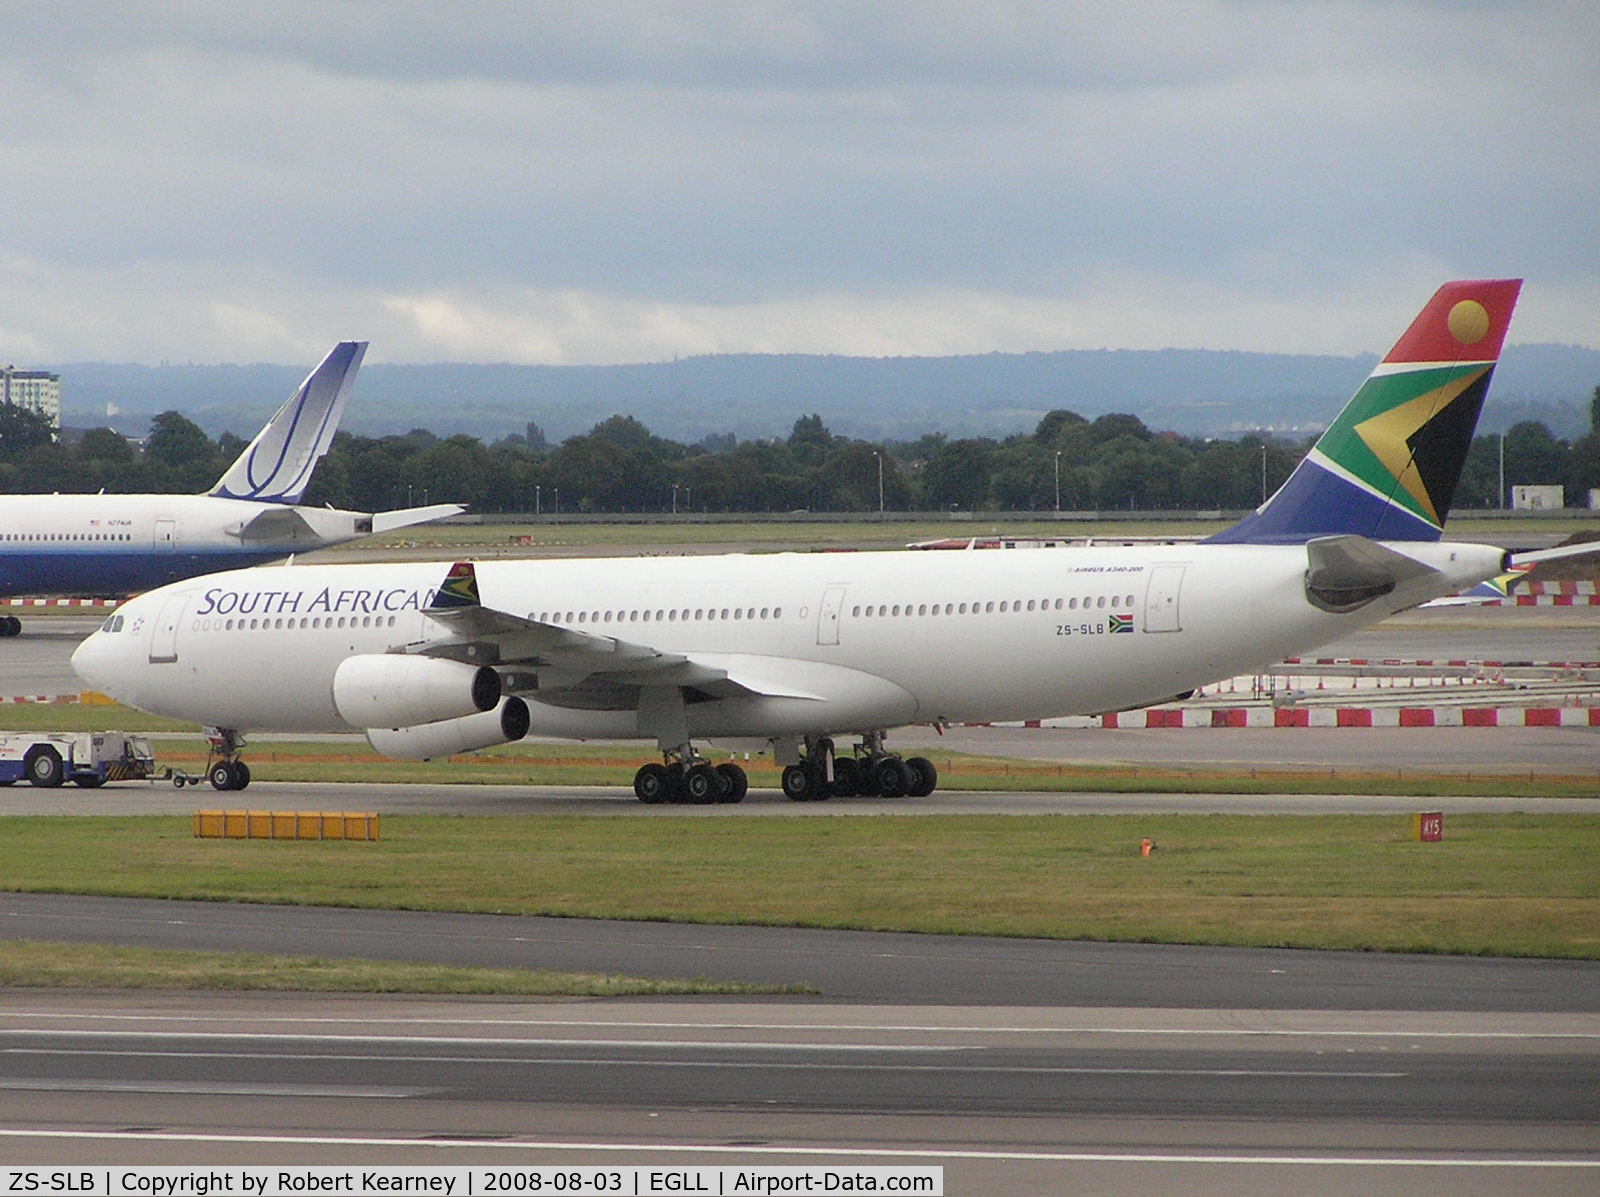 ZS-SLB, 1993 Airbus A340-211 C/N 011, South African pushing back